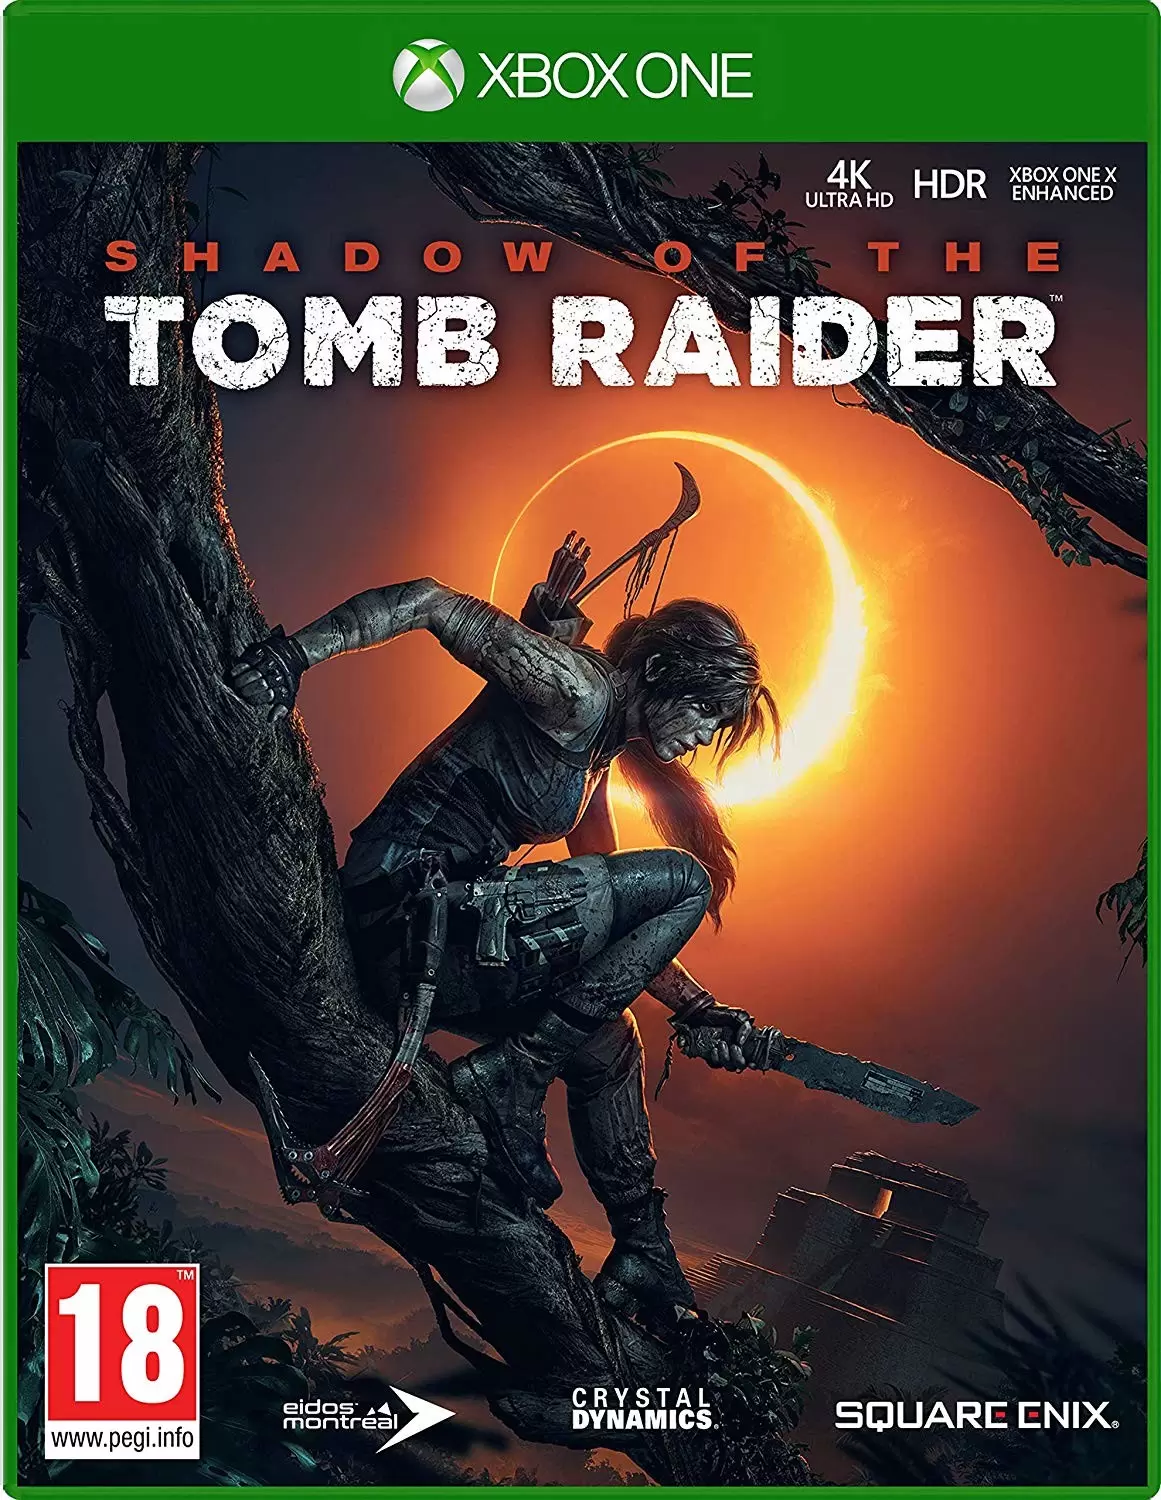 XBOX One Games - Shadow Of The Tomb Raider